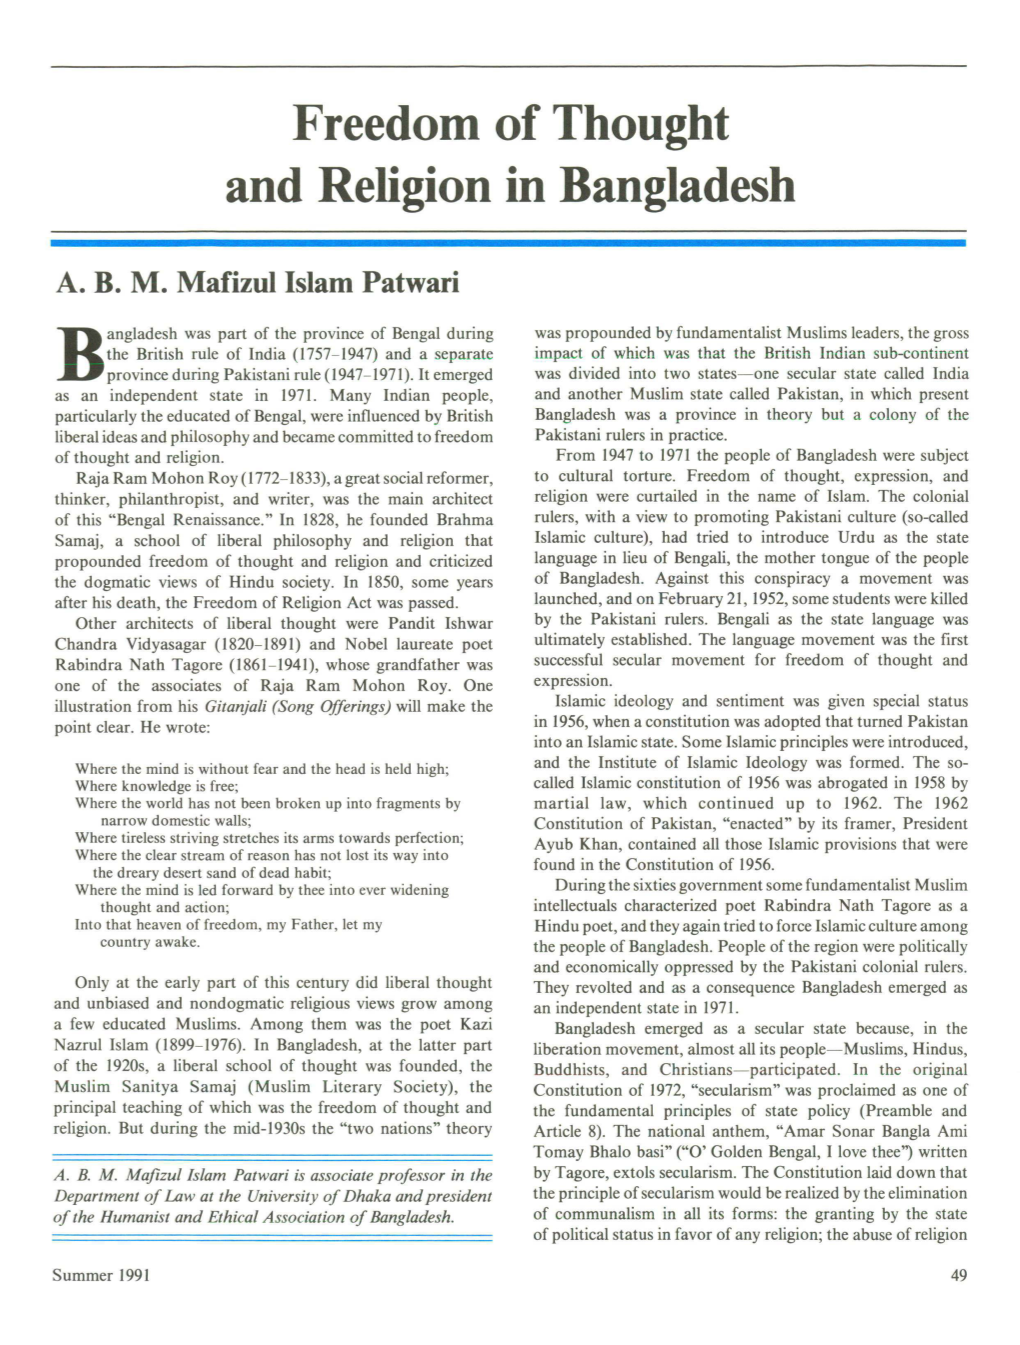 Freedom of Thought and Religion in Bangladesh